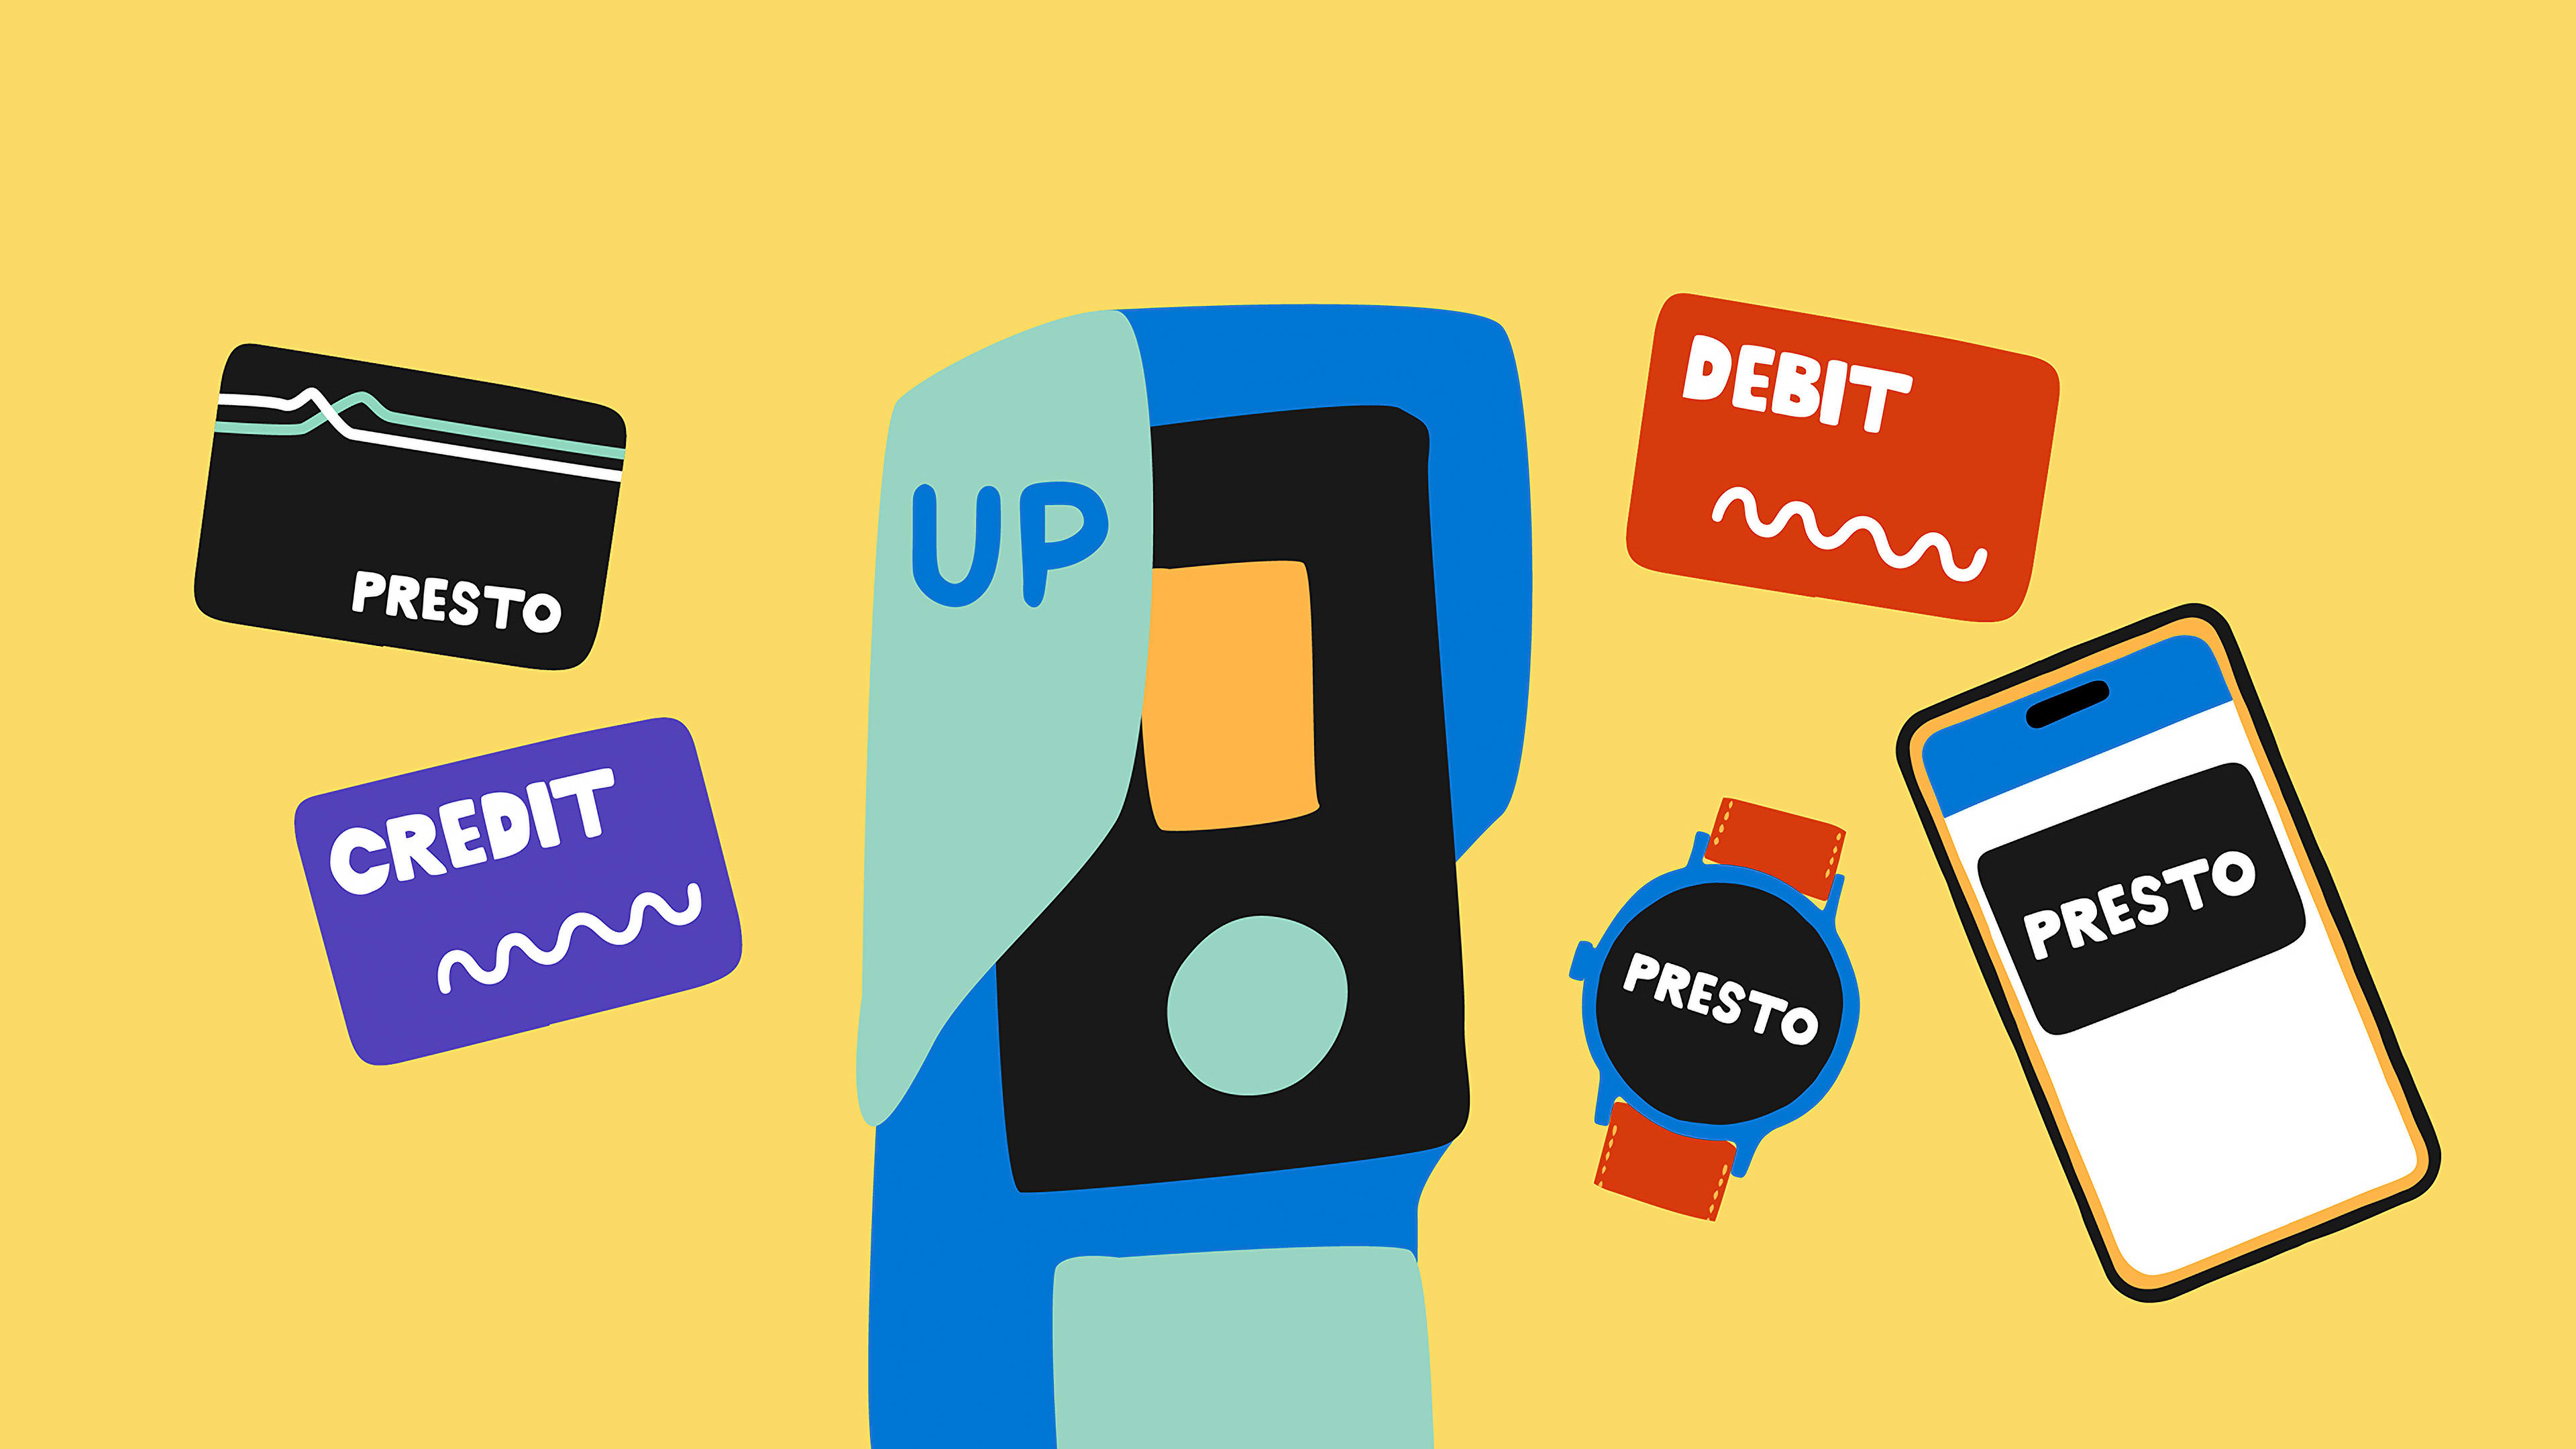 UP PRESTO Tap Payment Station surrounded by a phone, Smart Watch, debit, credit, and Presto cards